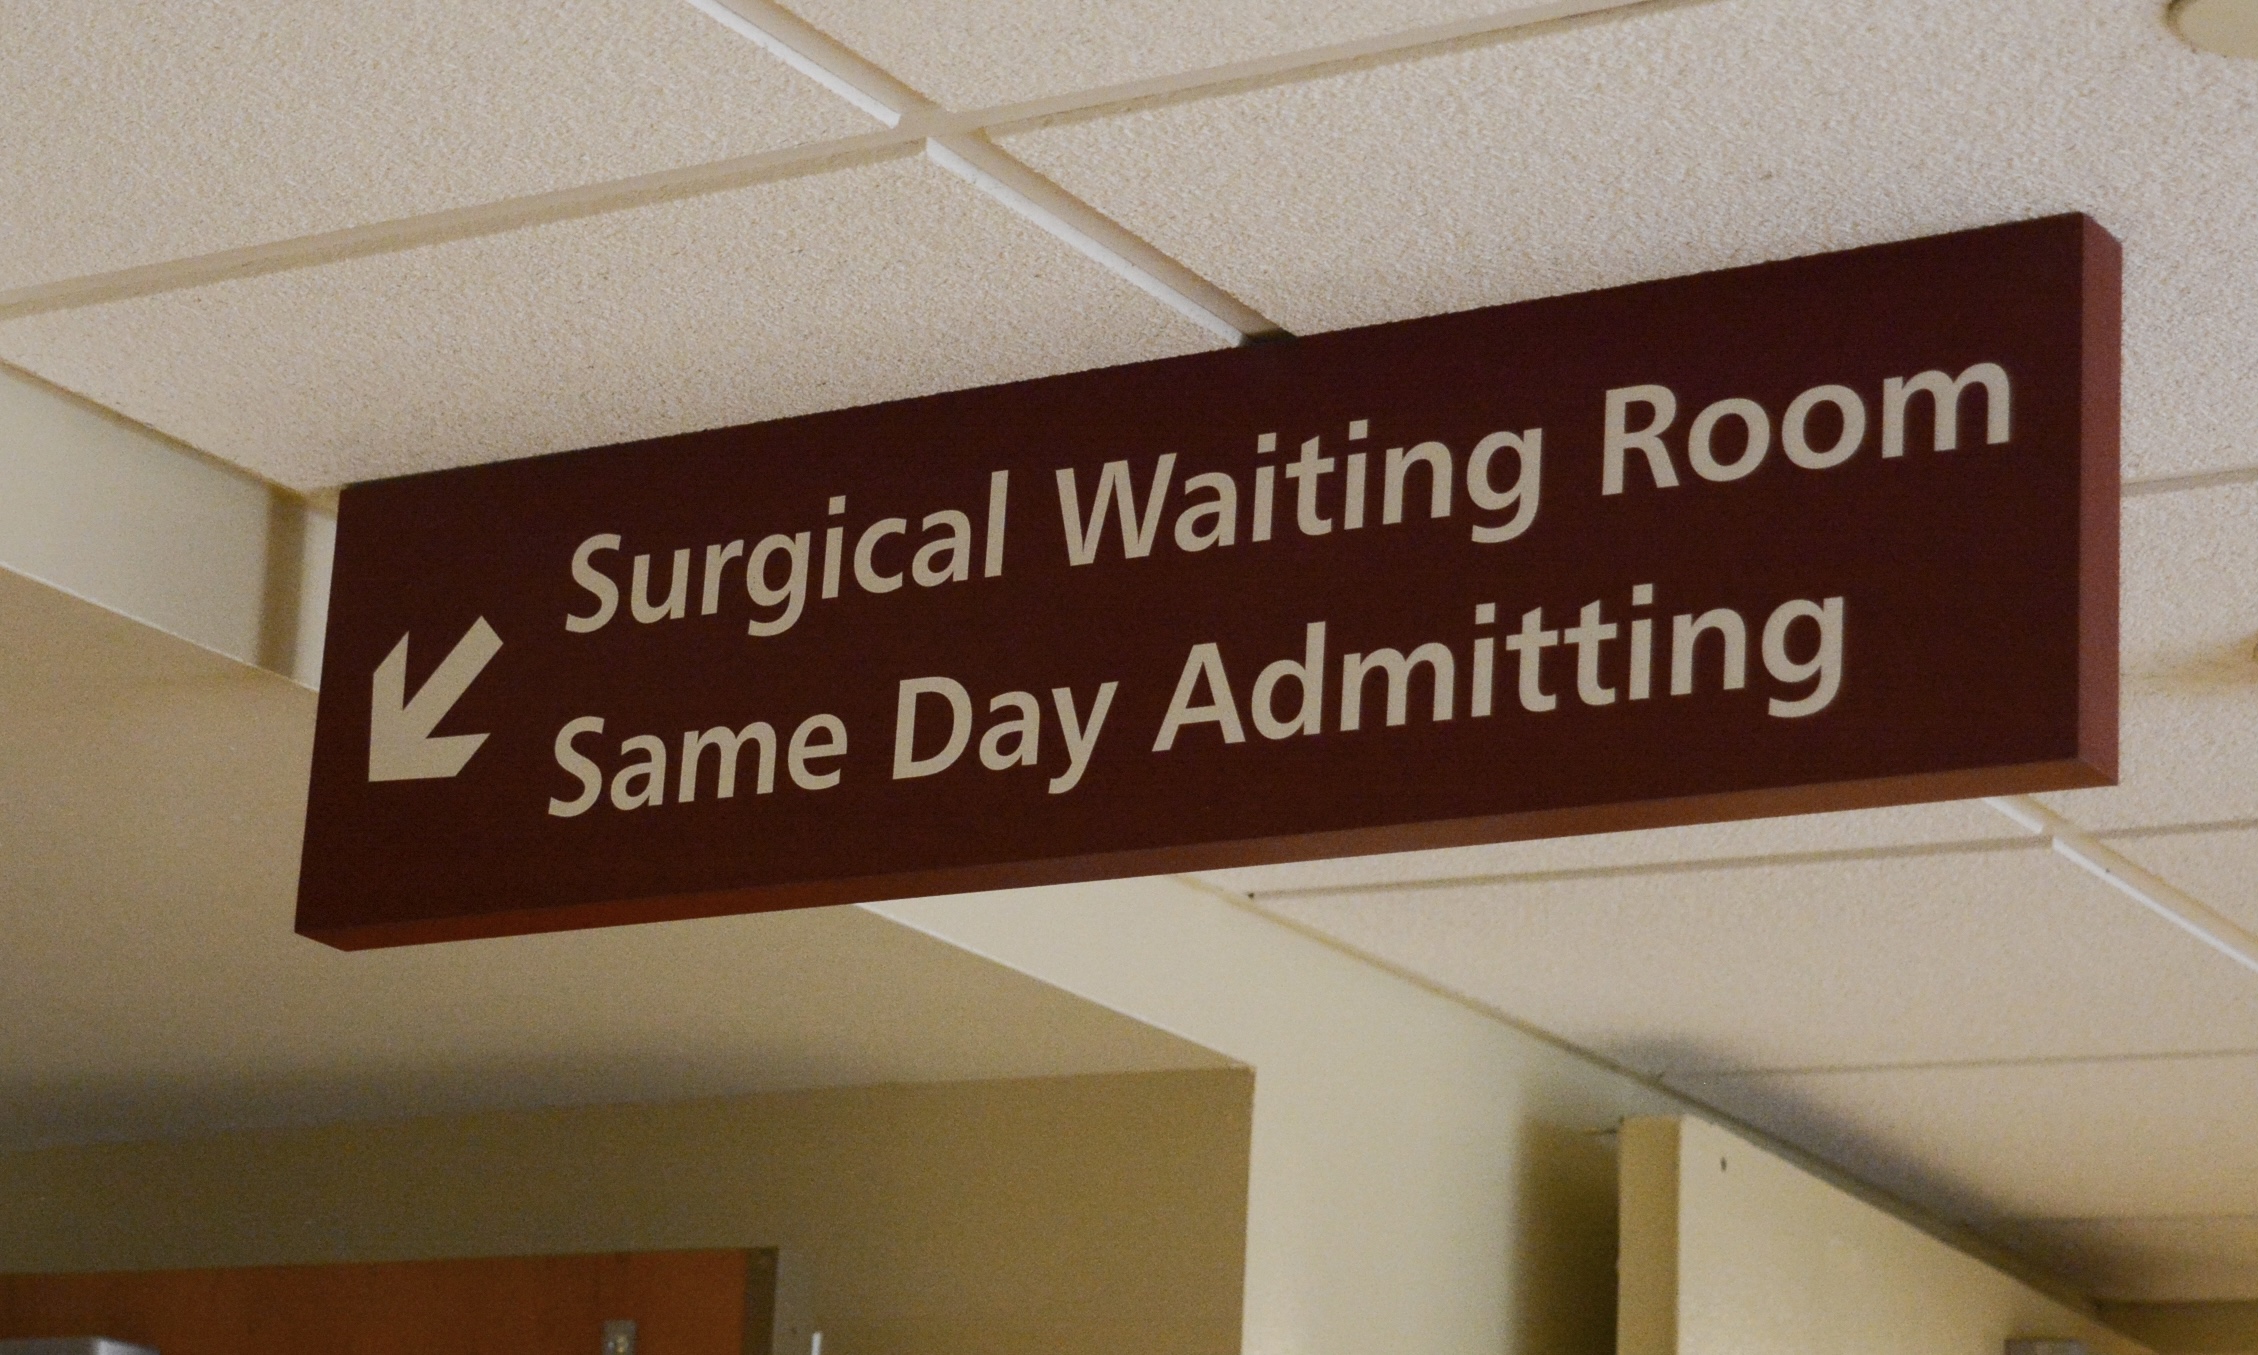 How soon after contracting Covid can I have surgery?